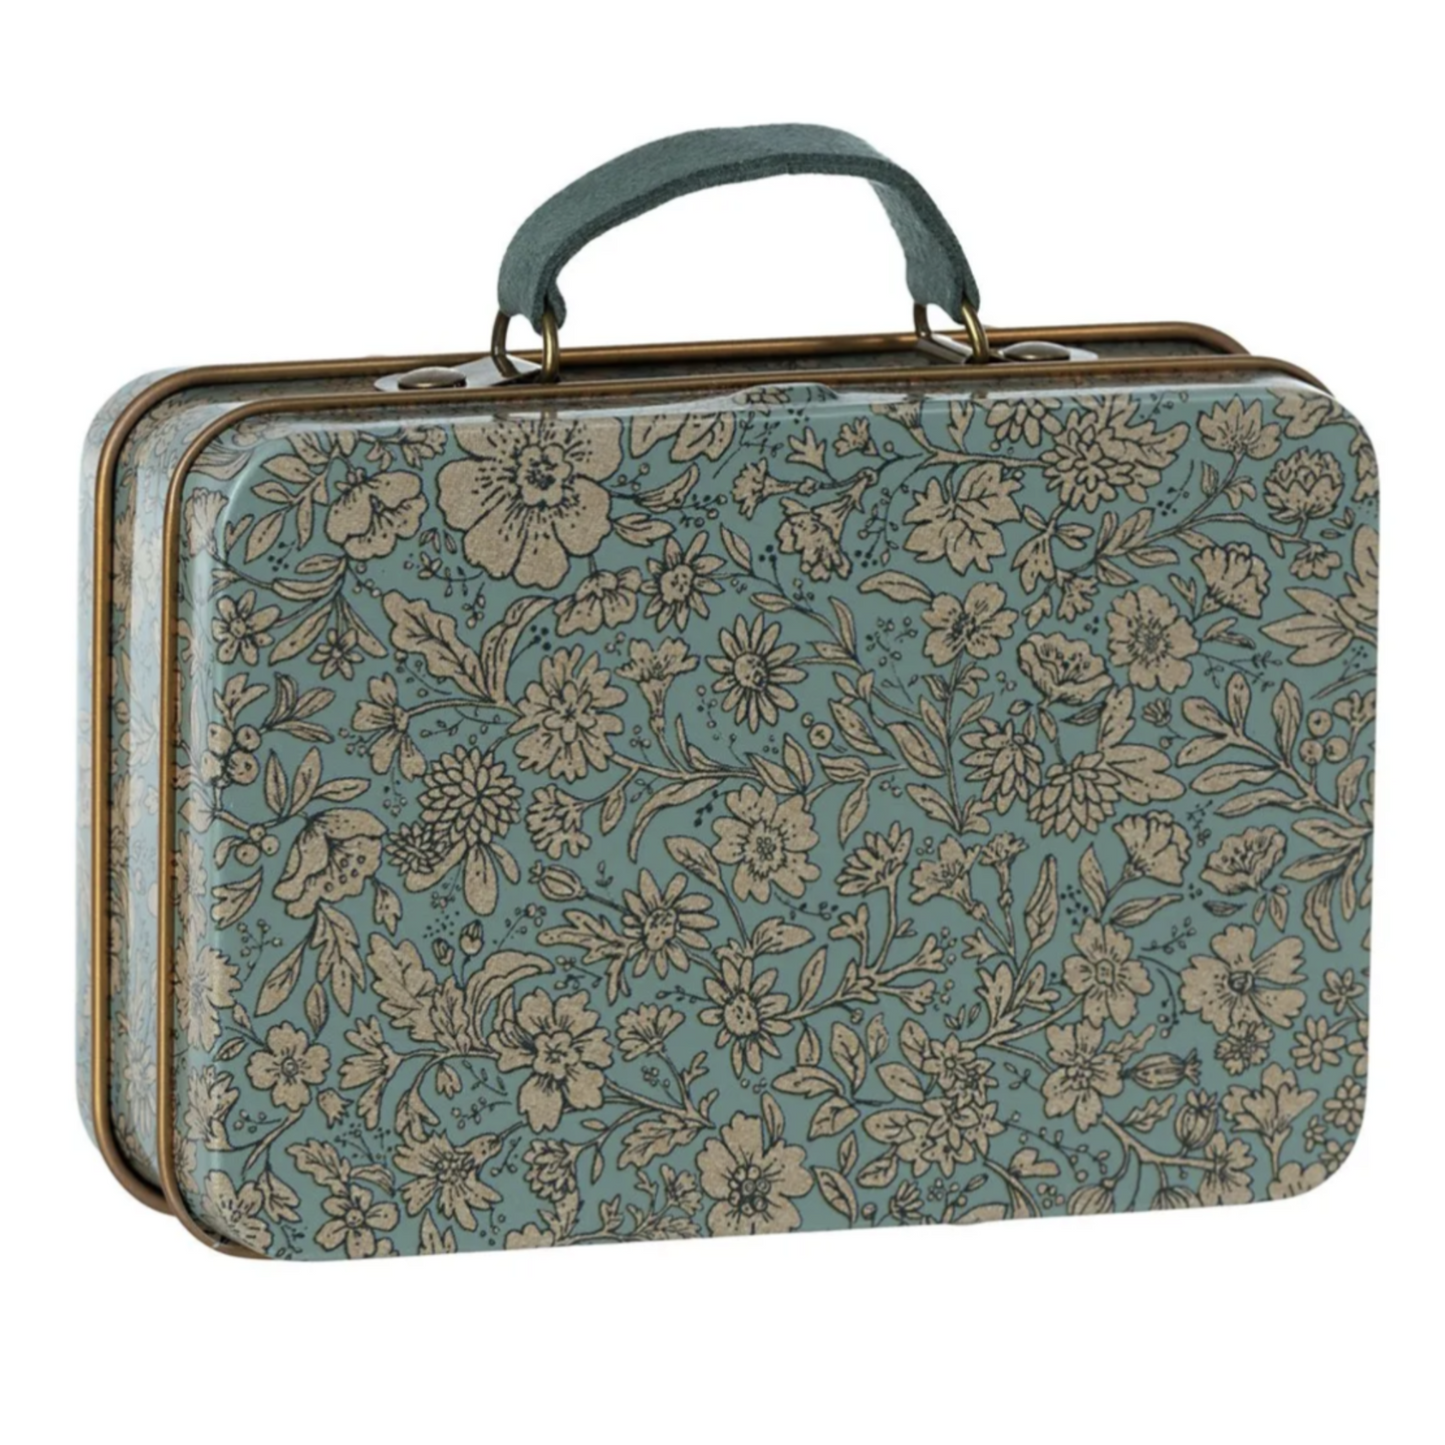 Maileg Small Metal Suitcase, Blossom, Blue (8240094511391)